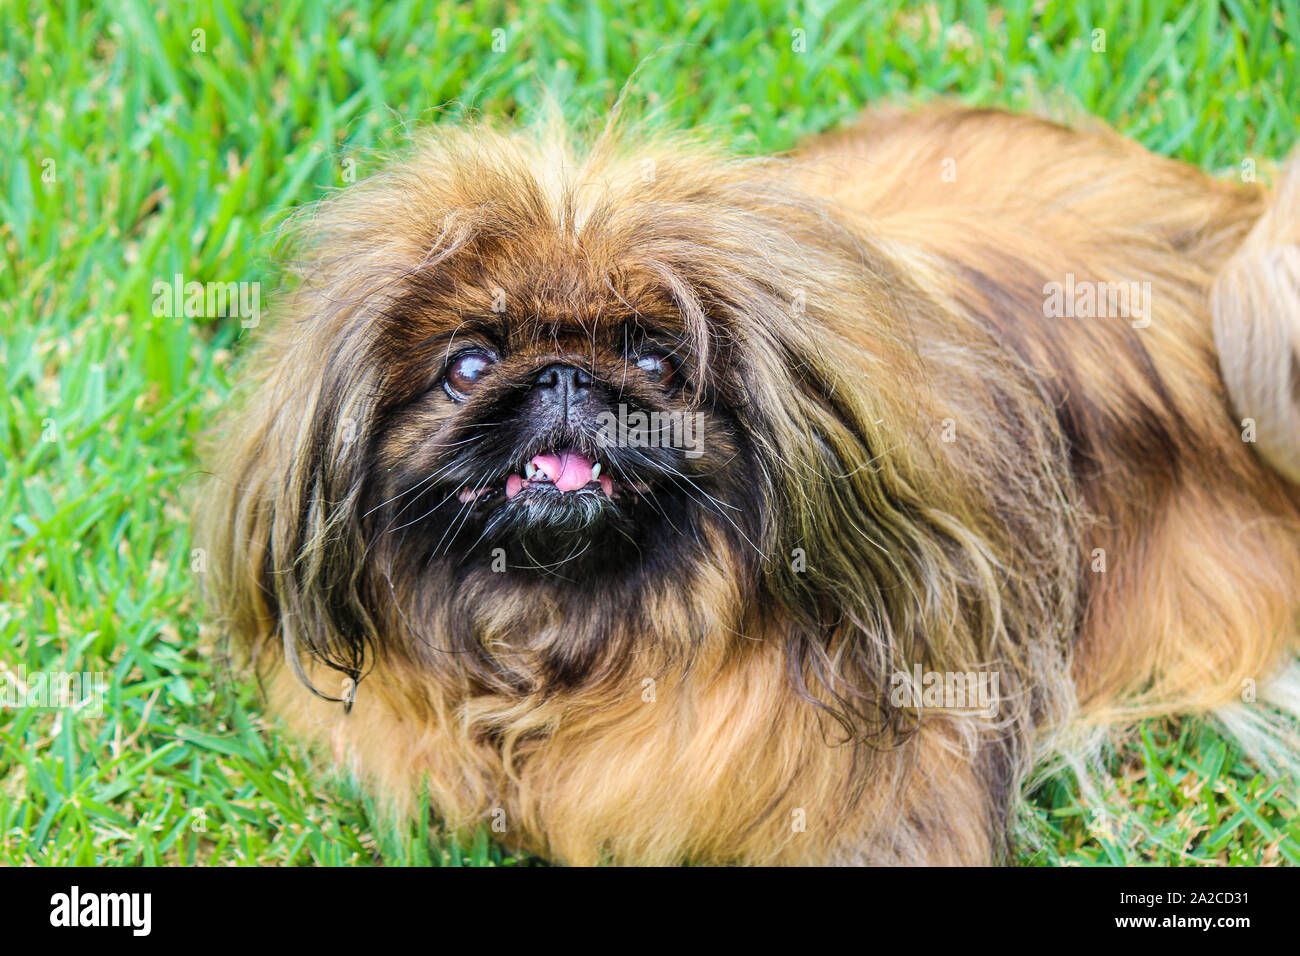 Beautiful brown long-haired Pekingese dog, adult female. Also known as Pekinese, Beijing Lion Dog or Chinese Spaniel. Purebred, pedigree. Photographed outdoors, green grass background. Stock Photo